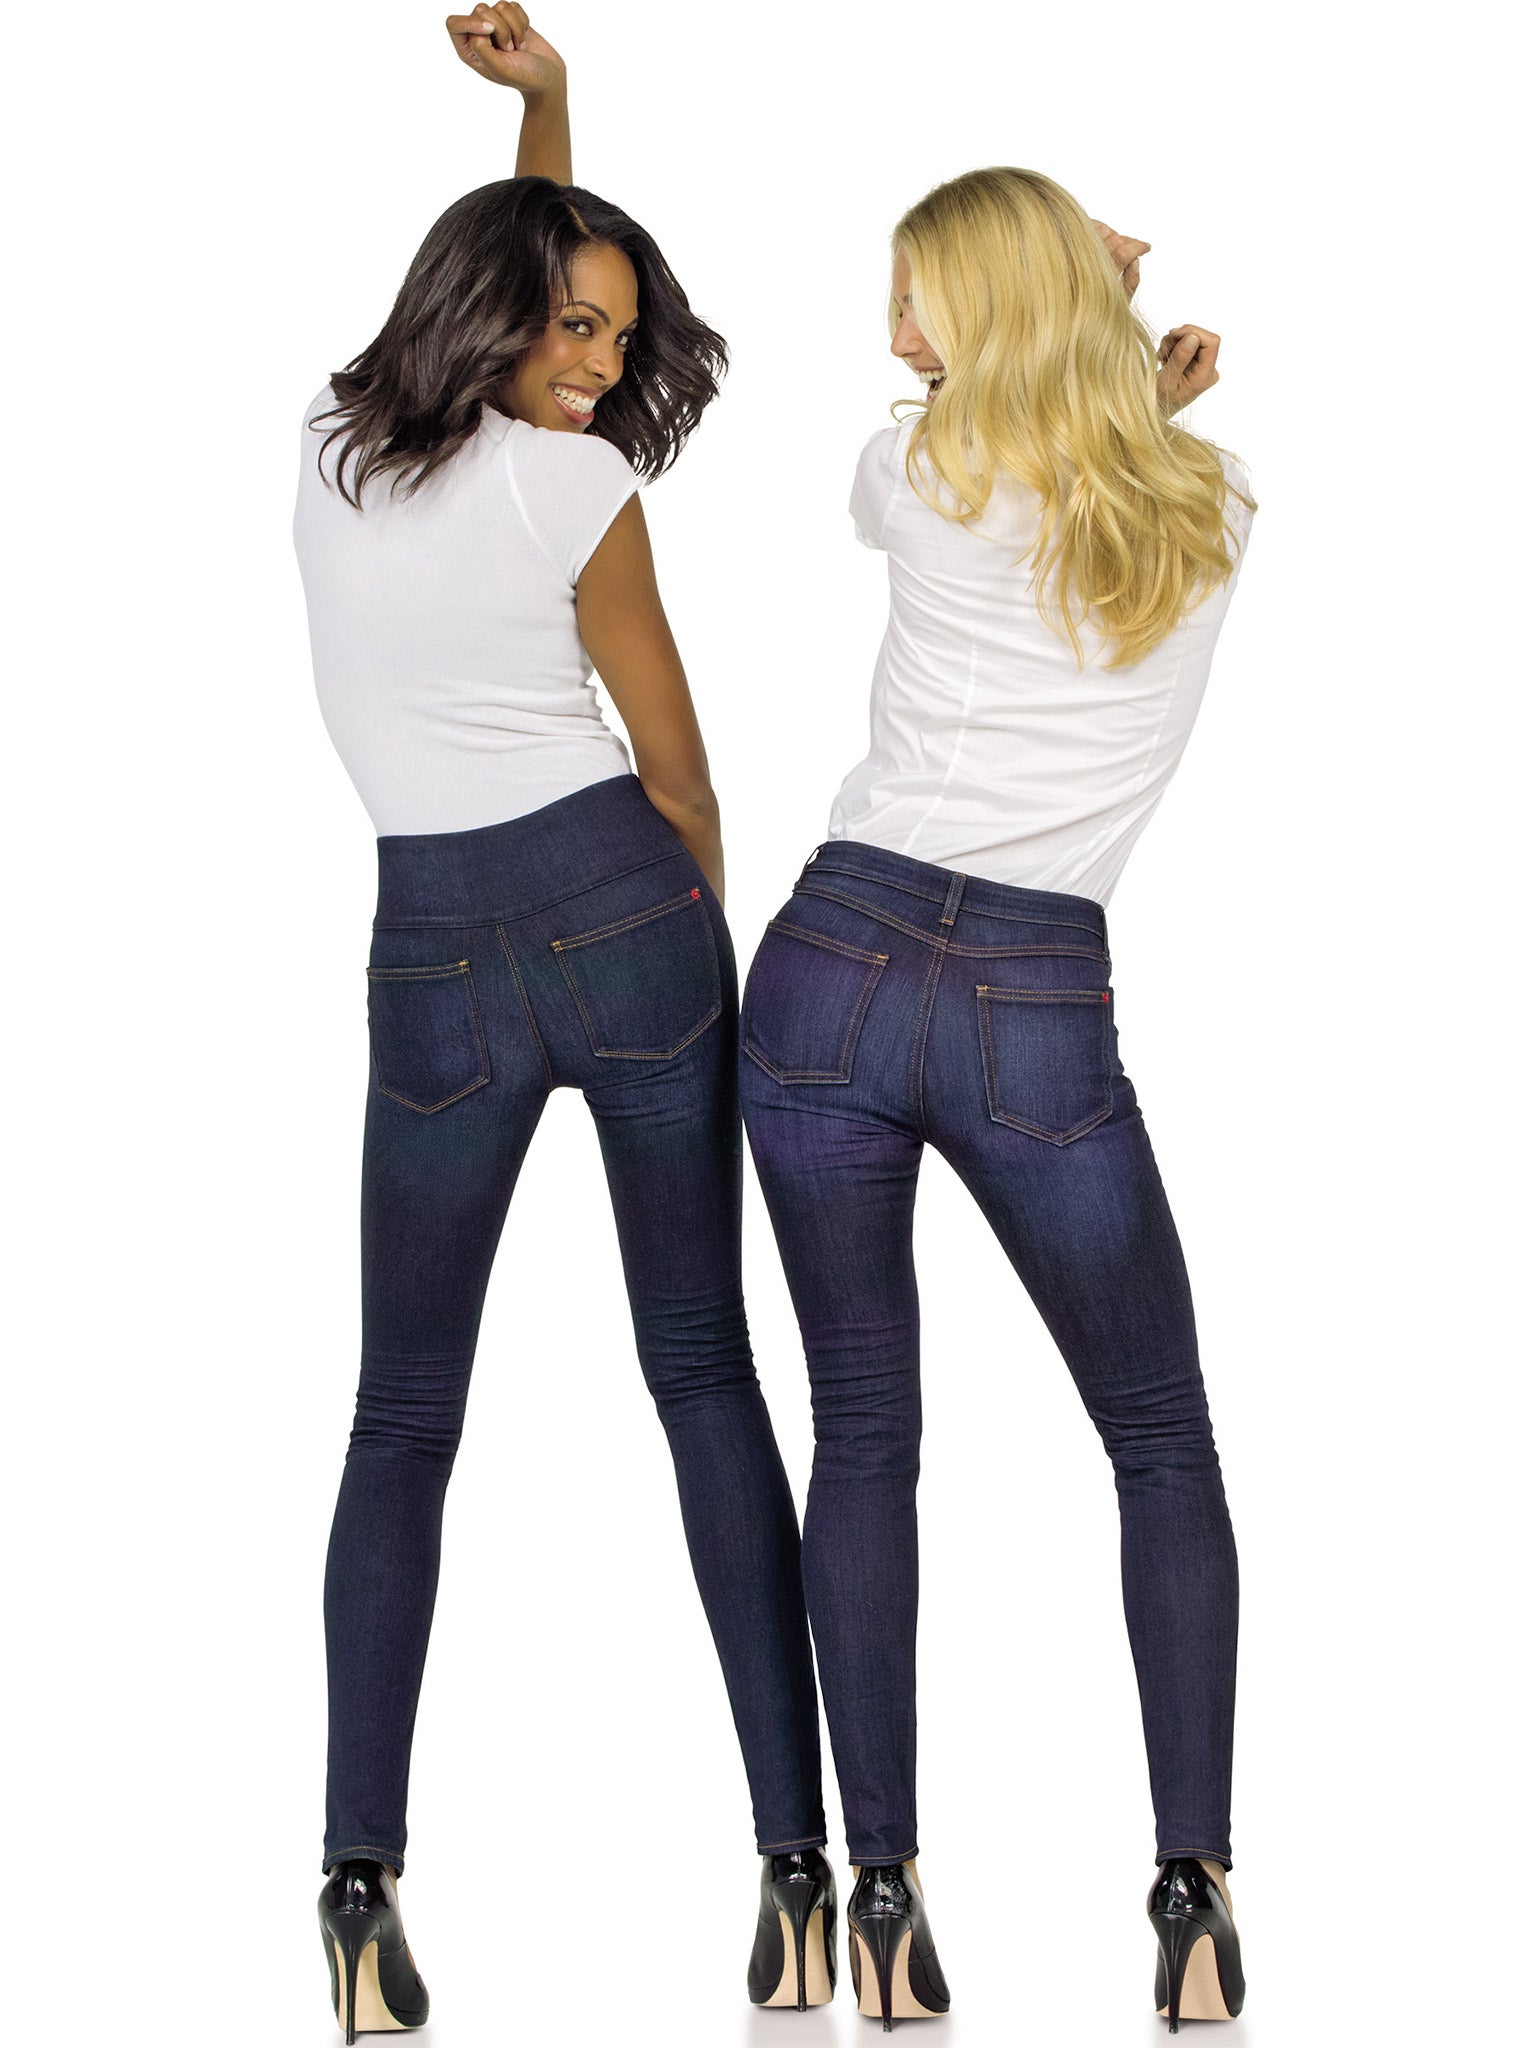 spanx under jeans before and after